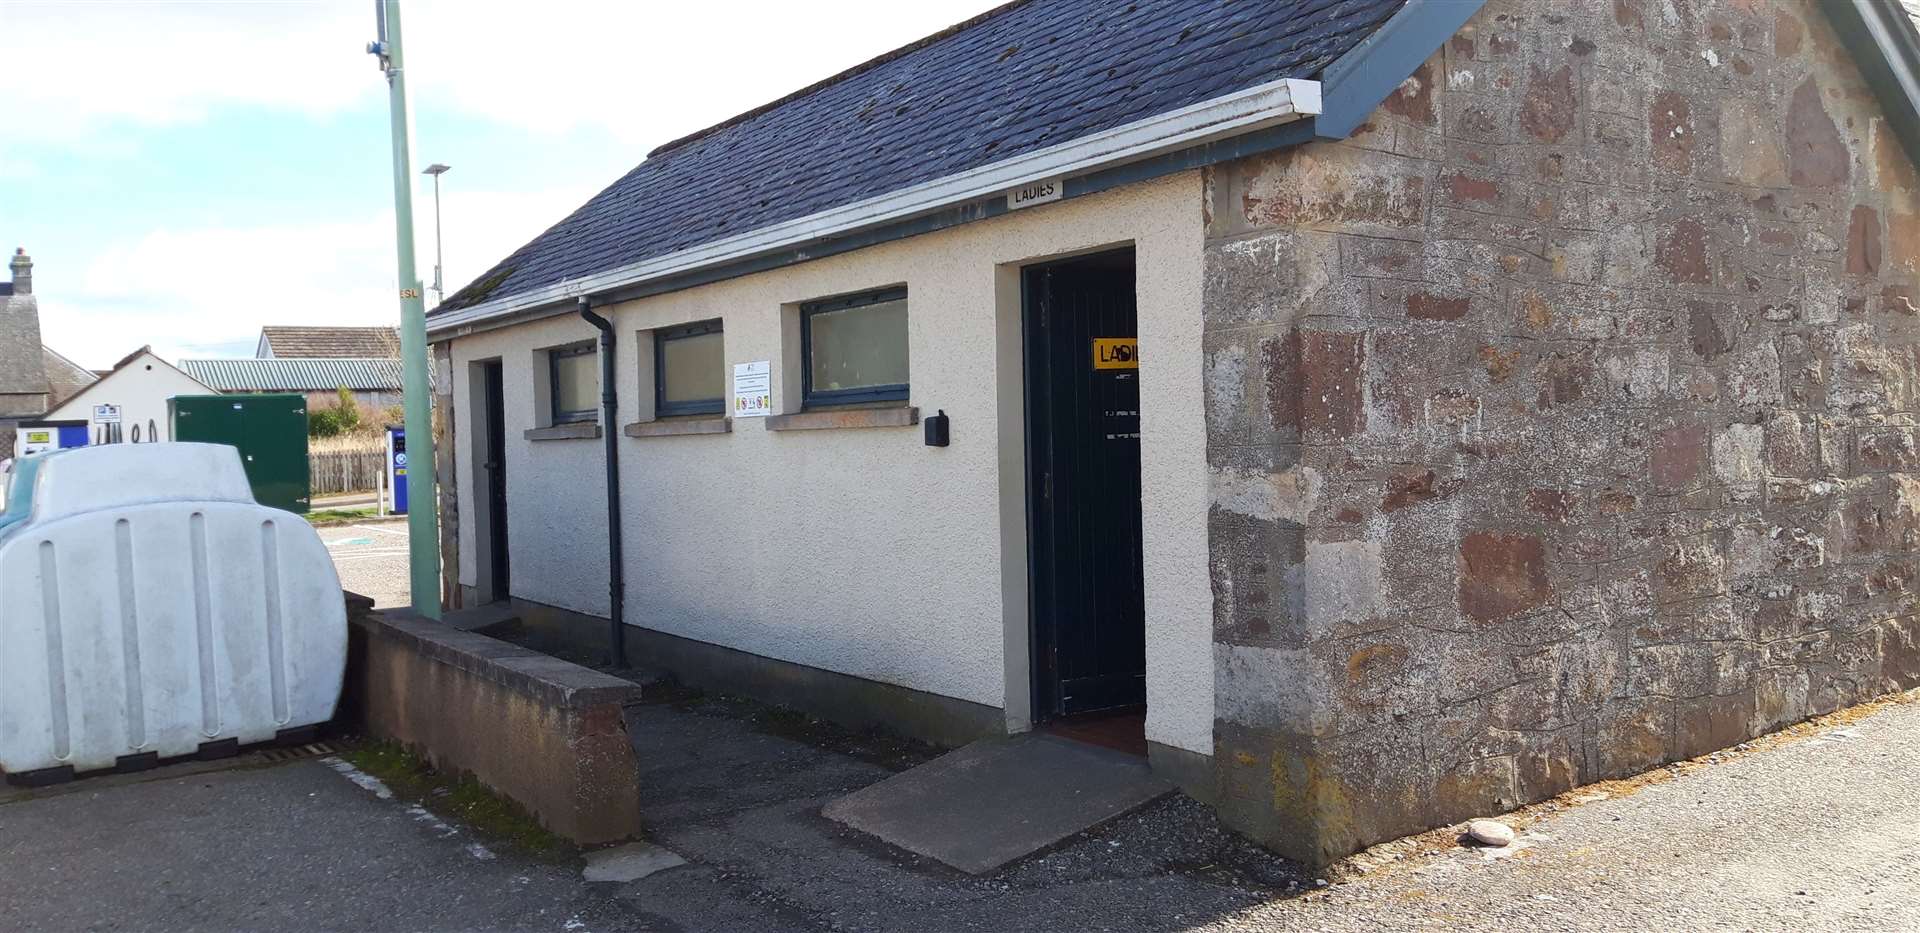 The public toilets at Brora have been painted inside and out.